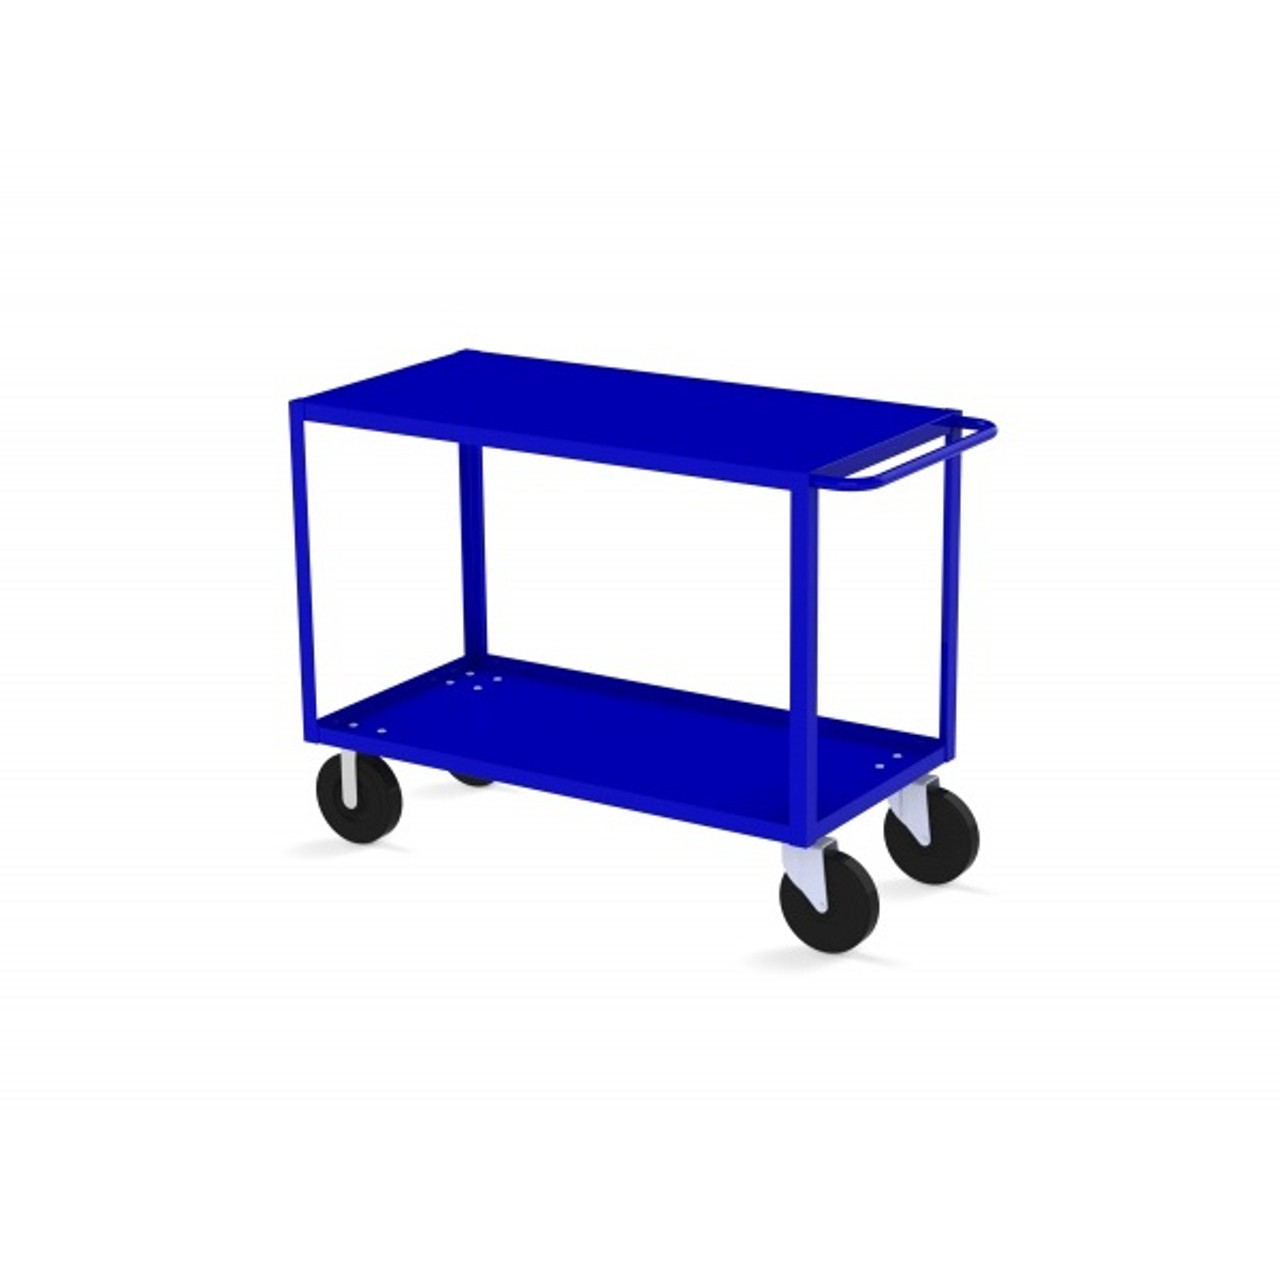 Valley Craft Two Shelf 30 x 60" Flush-Top Utility Cart, Blue with Mold On Casters(CALL FOR BEST PRICING)